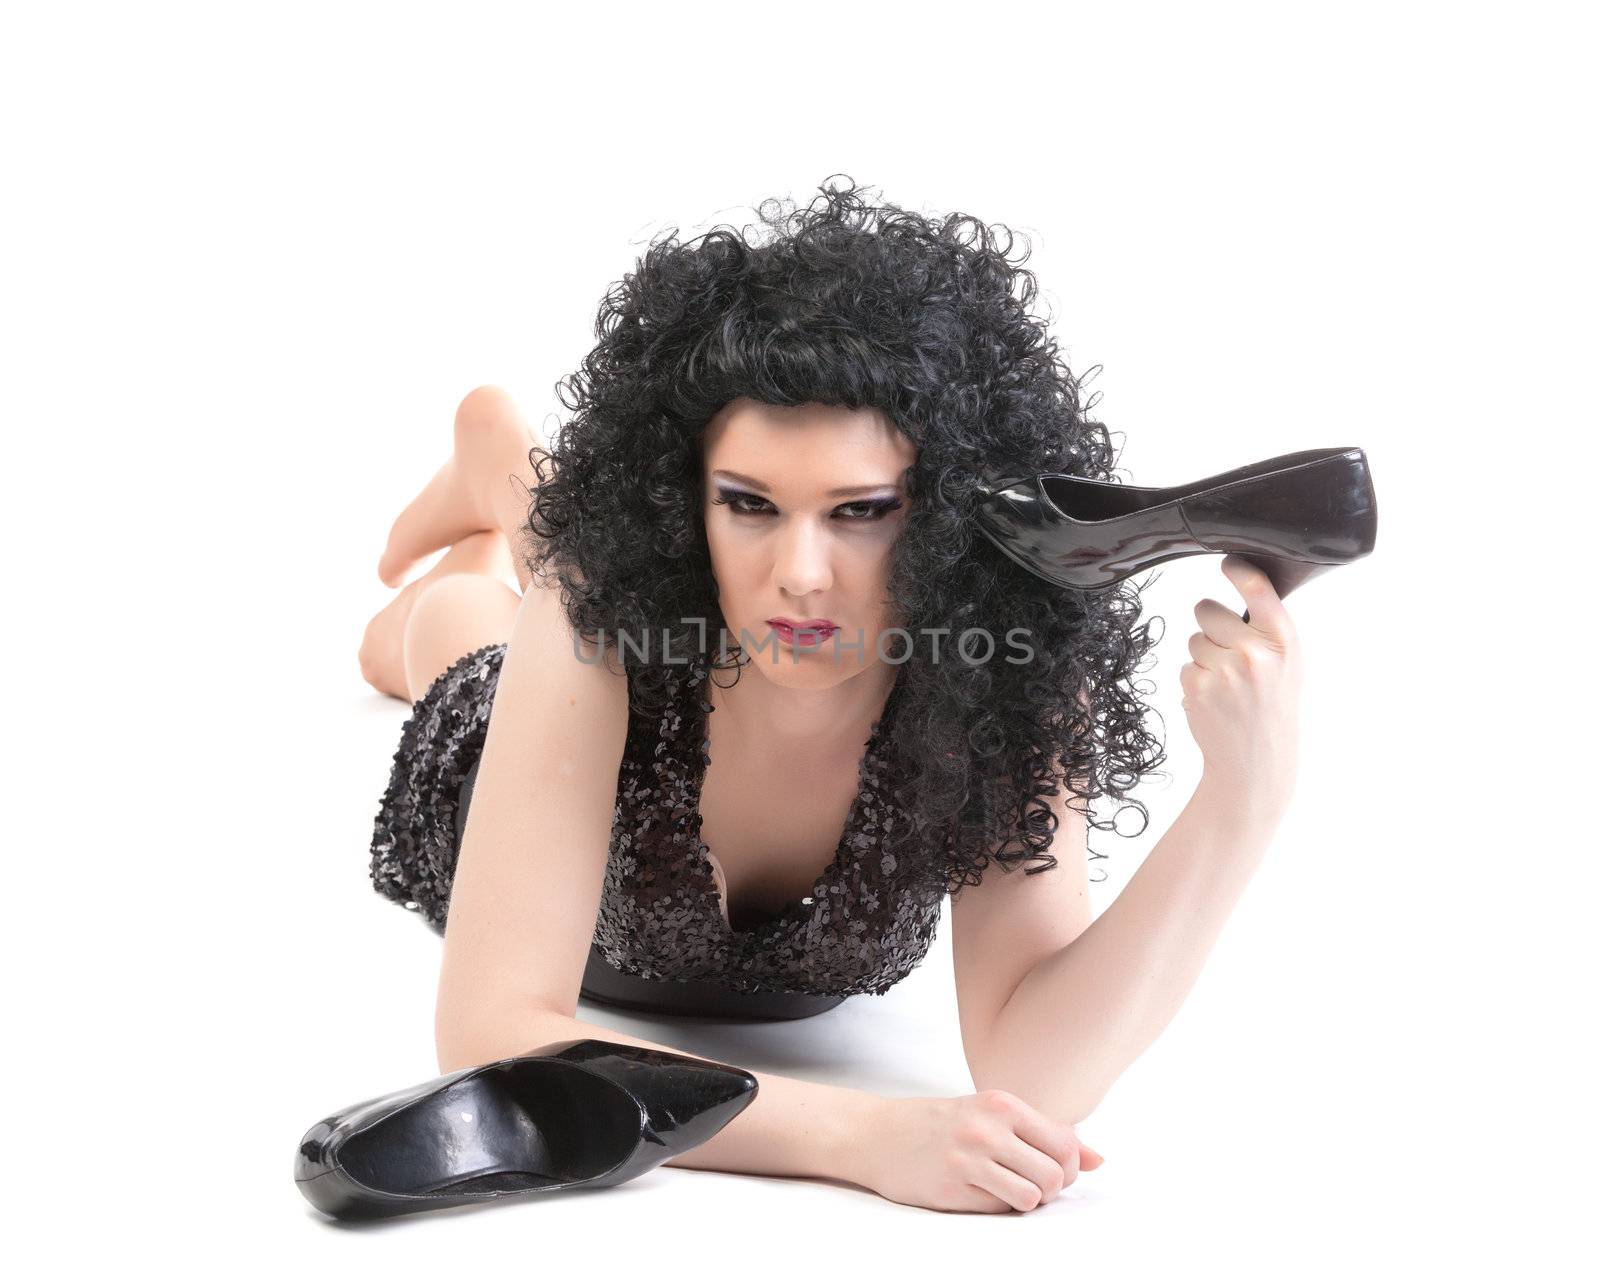 Portrait of drag queen lying on floor. Man dressed as Woman, isolated on white background